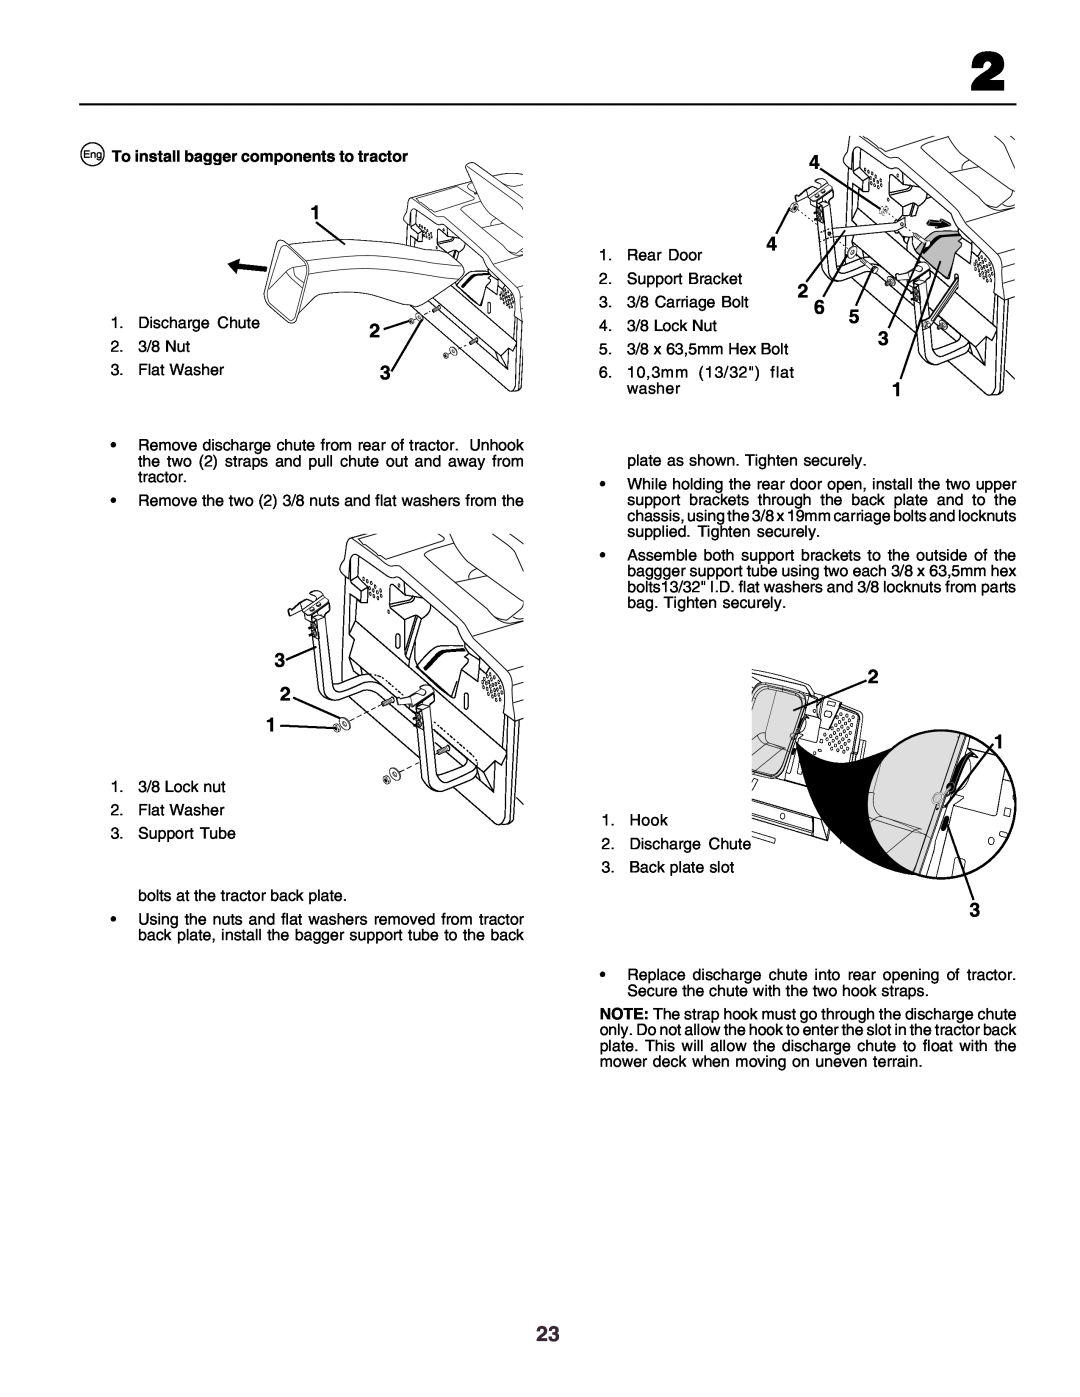 Husqvarna CT130 instruction manual Eng To install bagger components to tractor 